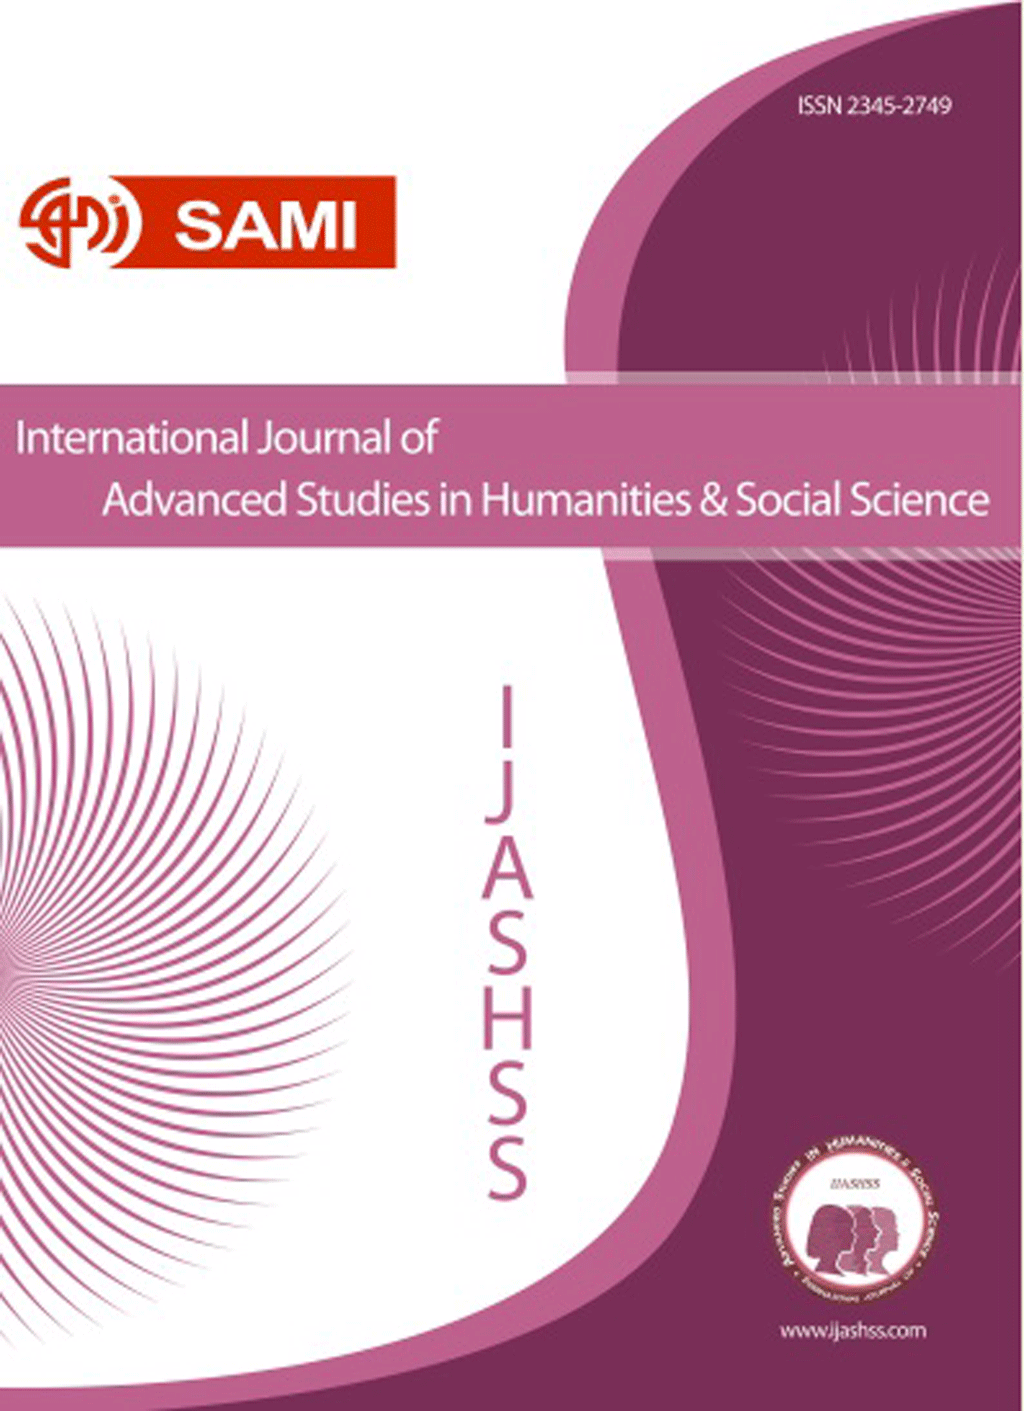 International Journal of Advanced Studies in Humanities and Social Science - July 2012, Volume 1 - Issue 3